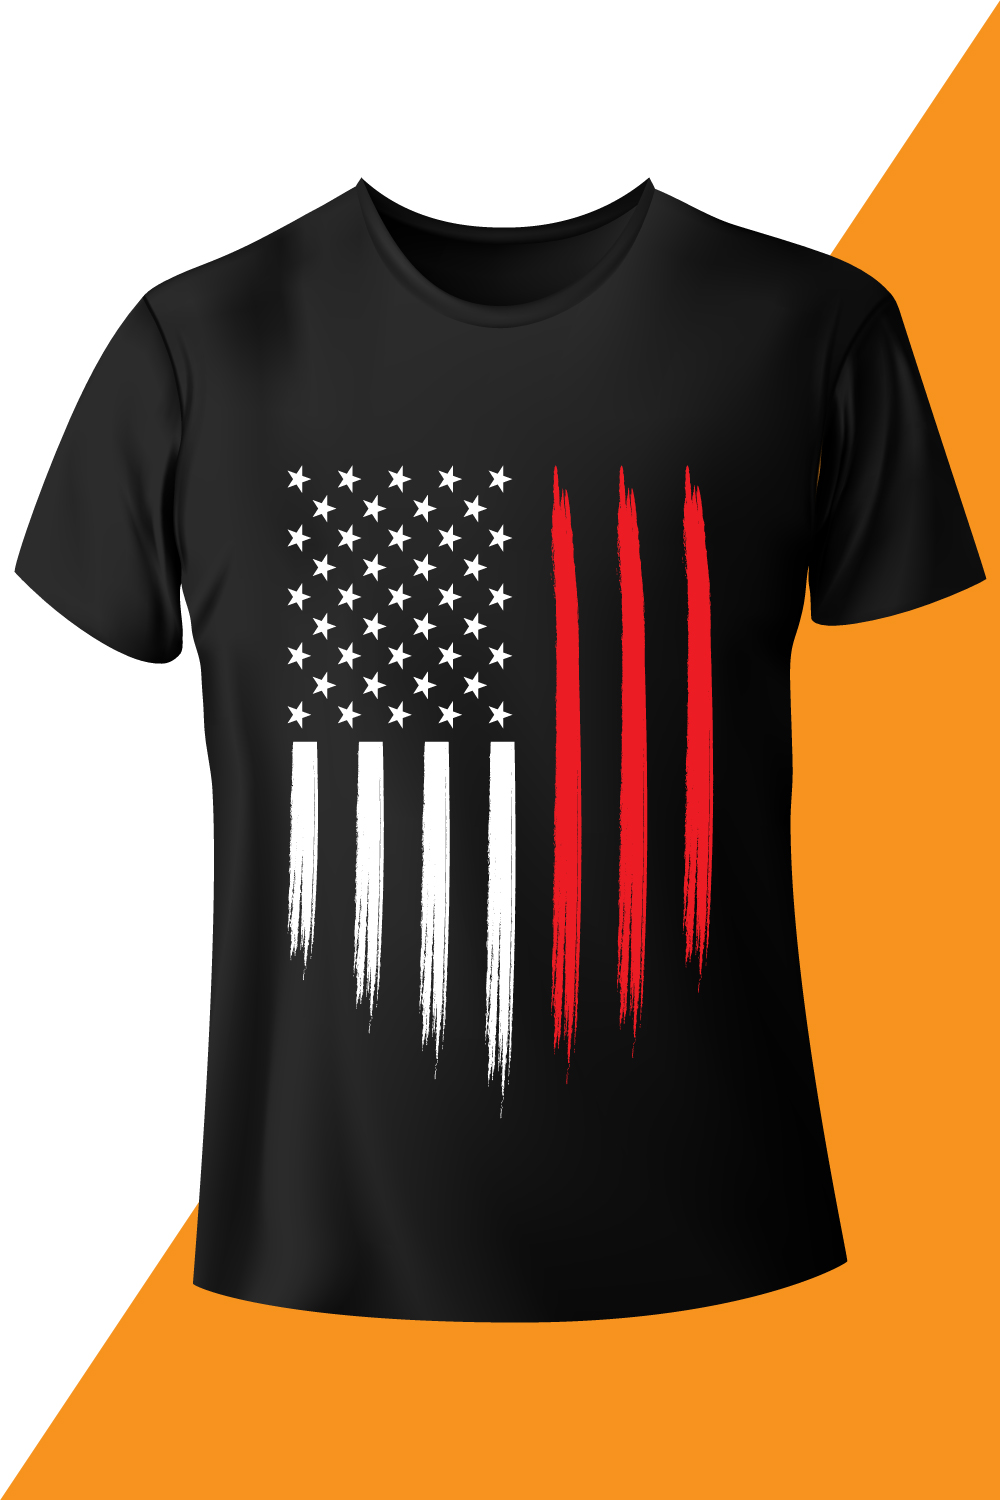 Image of a black T-shirt with a beautiful print of the American flag.